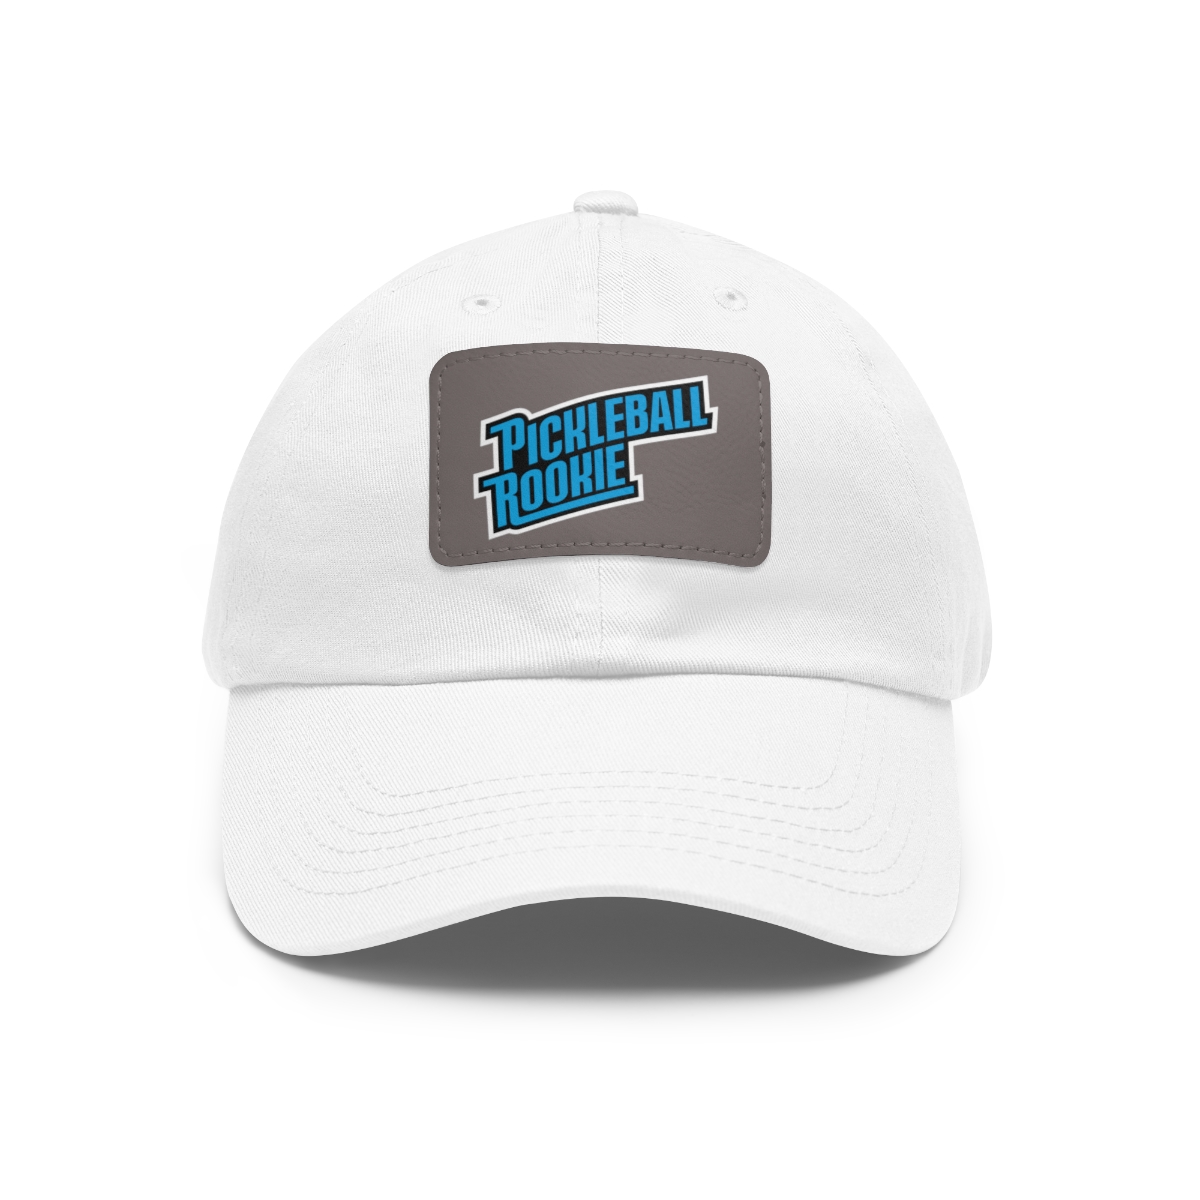 Pickleball Rookie Dad Hat product main image